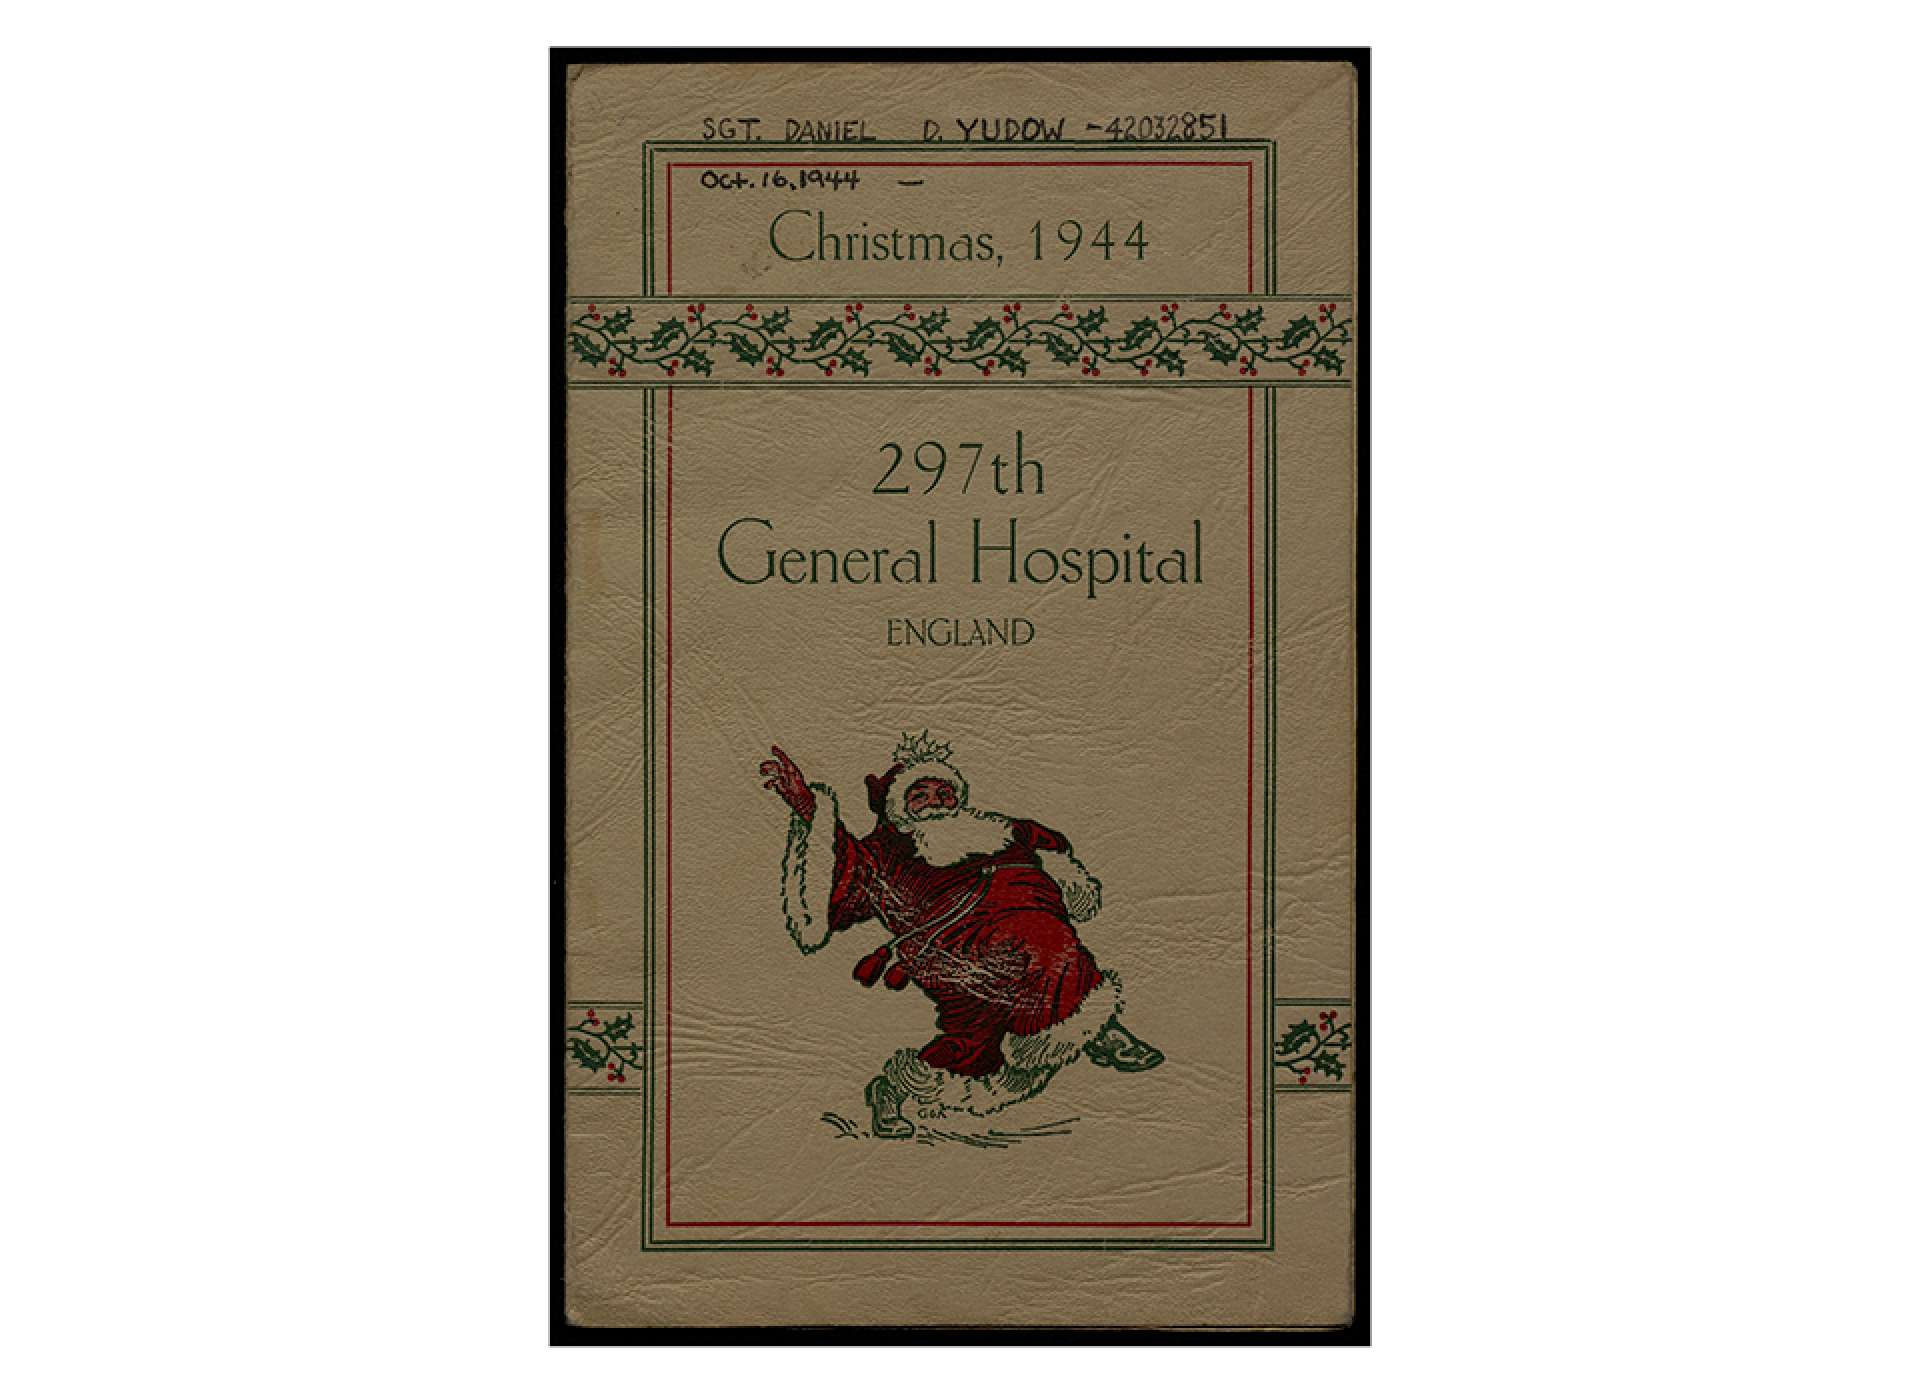 1944 Christmas Menu from the 297th General Hospital in England. Gift in Memory of Daniel David Yudow, 2005.070.002